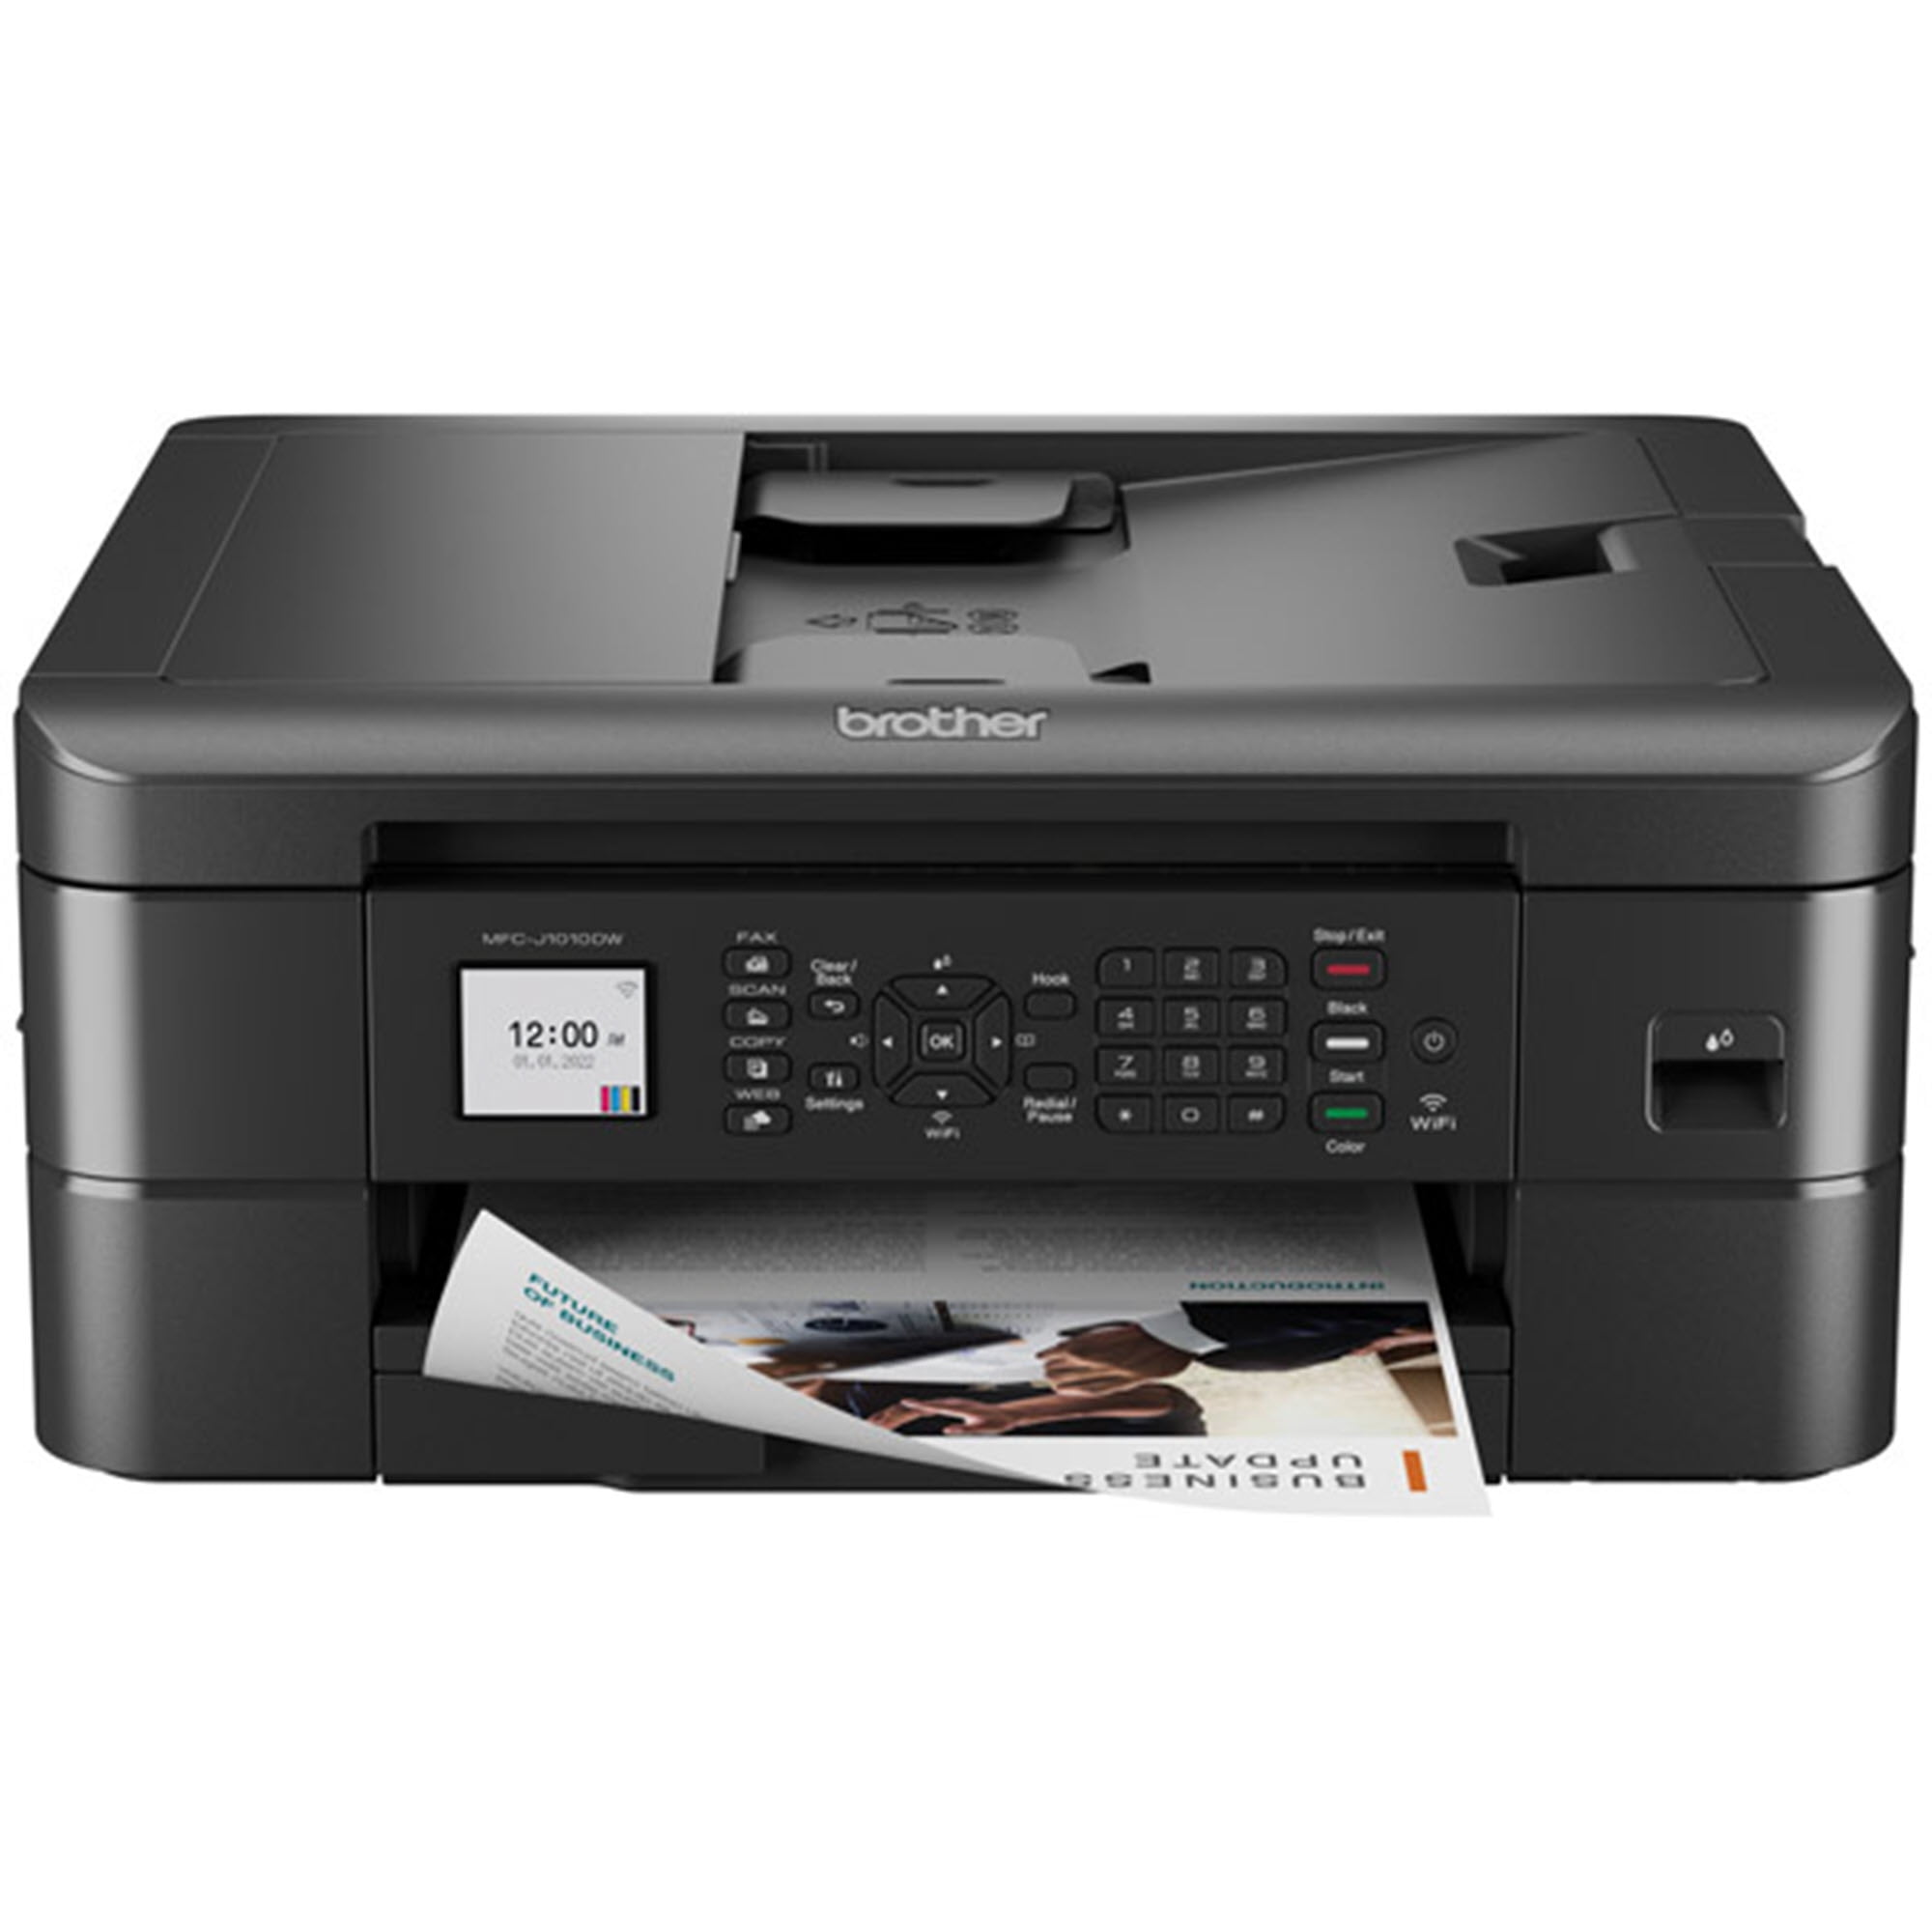 Brother MFC-J1010DW Inkjet All-in-One Printer Mobile and Duplex Printing - Walmart.com